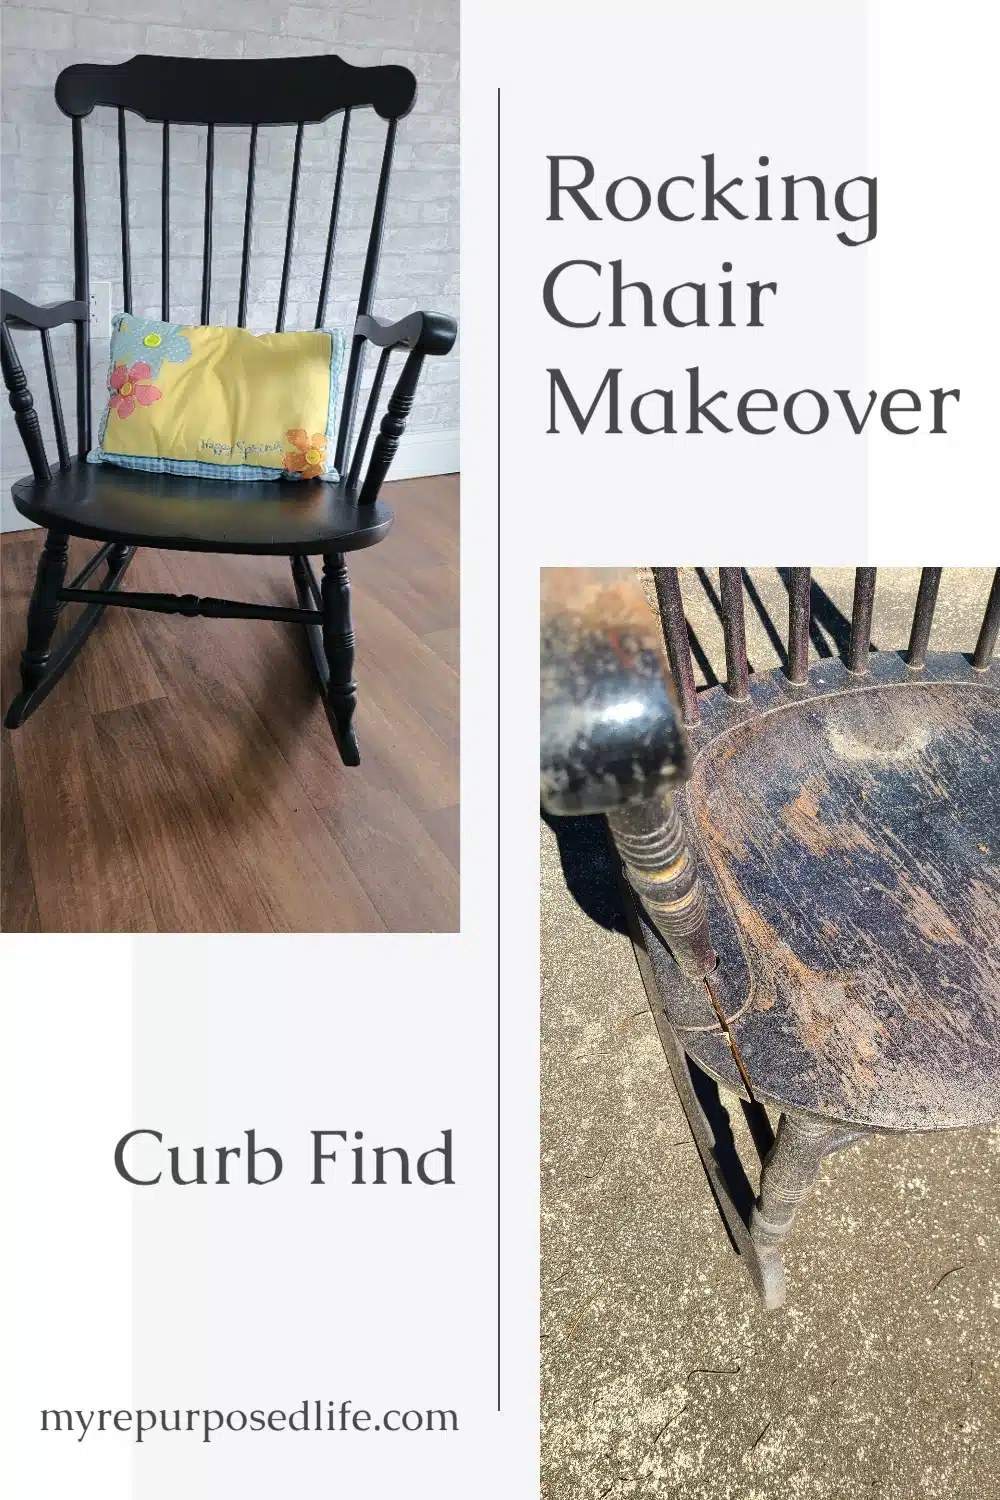 Steps for saving an old abused chair. In this wooden rocking chair makeover tutorial, you will see steps to bring an old piece back to life. Most people would throw this chair away. But it still had a lot of life left. #myrepurposedlife #trashtotreasure #furniture #makeover via @repurposedlife